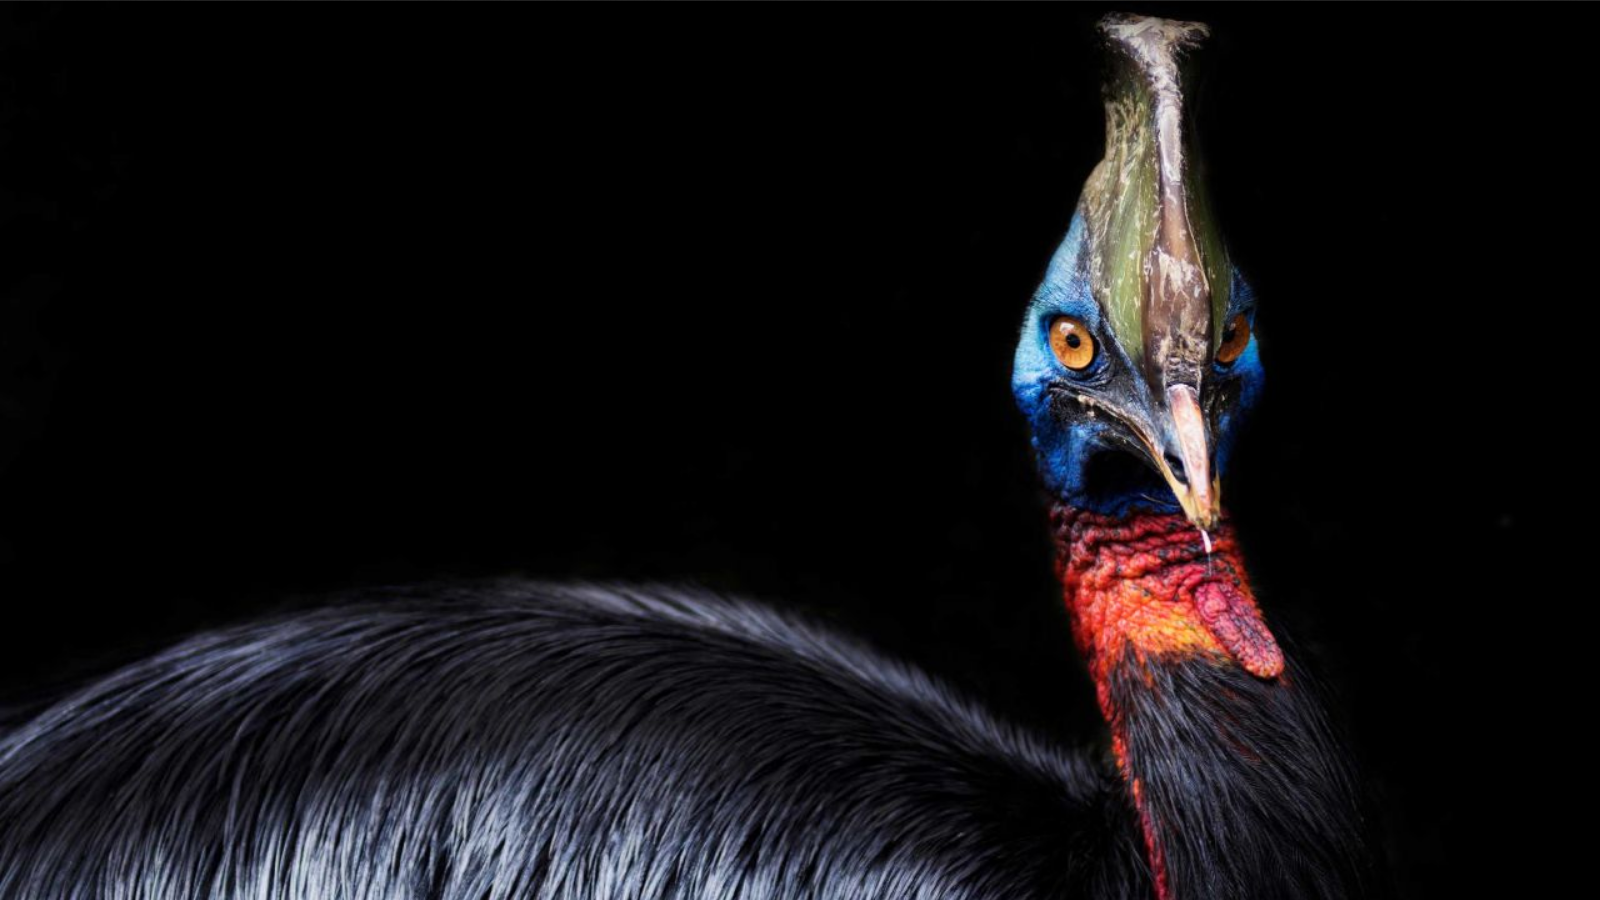 The world’s deadliest bird was raised by people 18,000 years ago